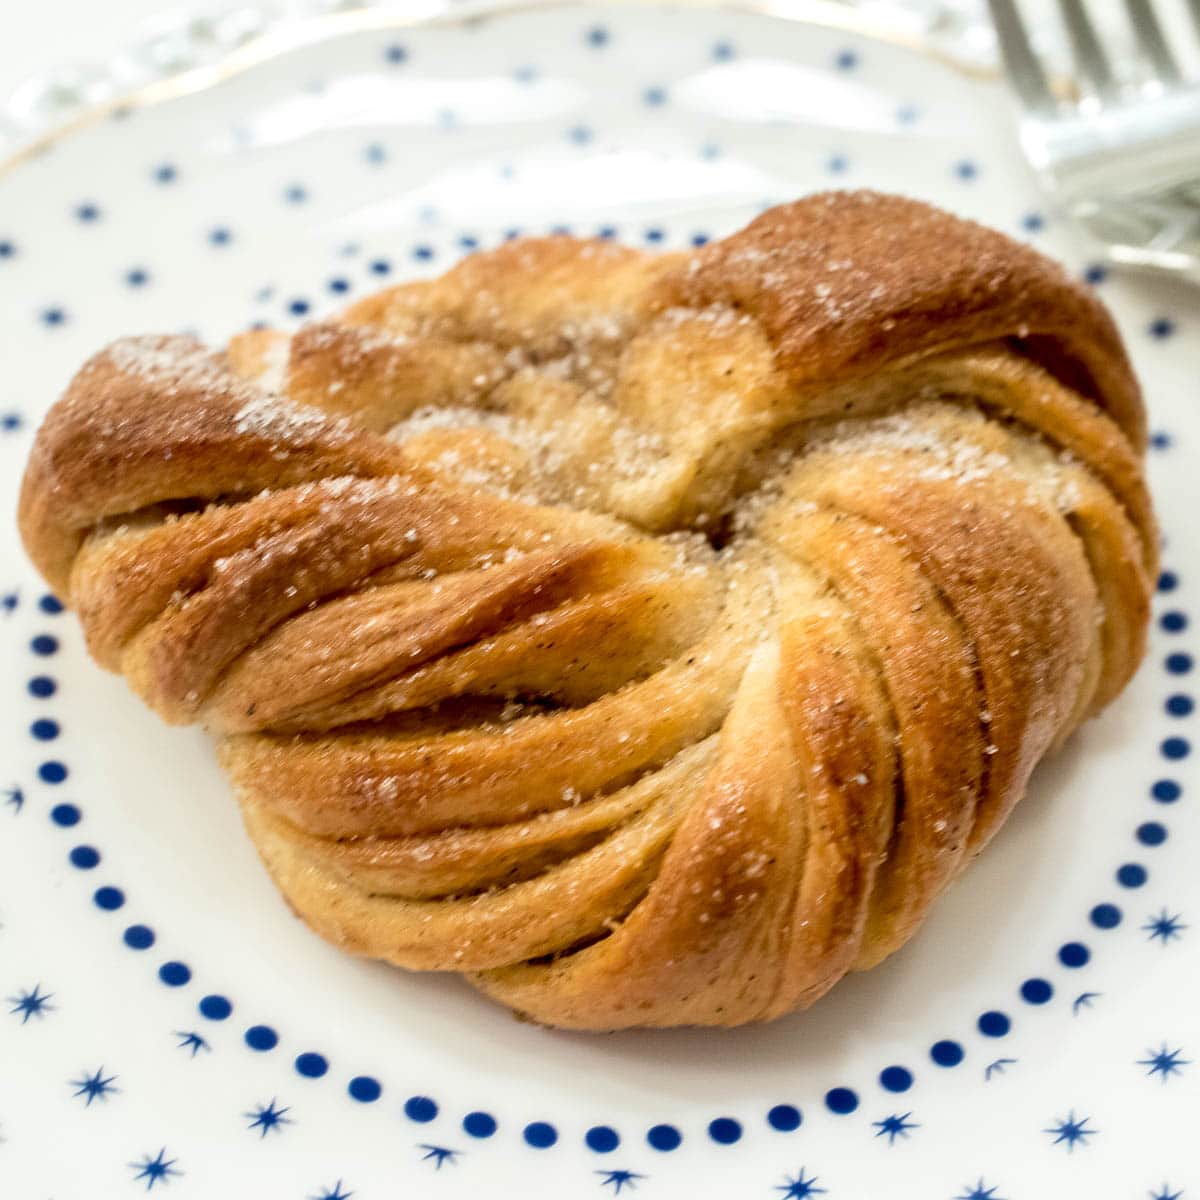 A Swedish Cardamom Knot sits on a blue and white plate